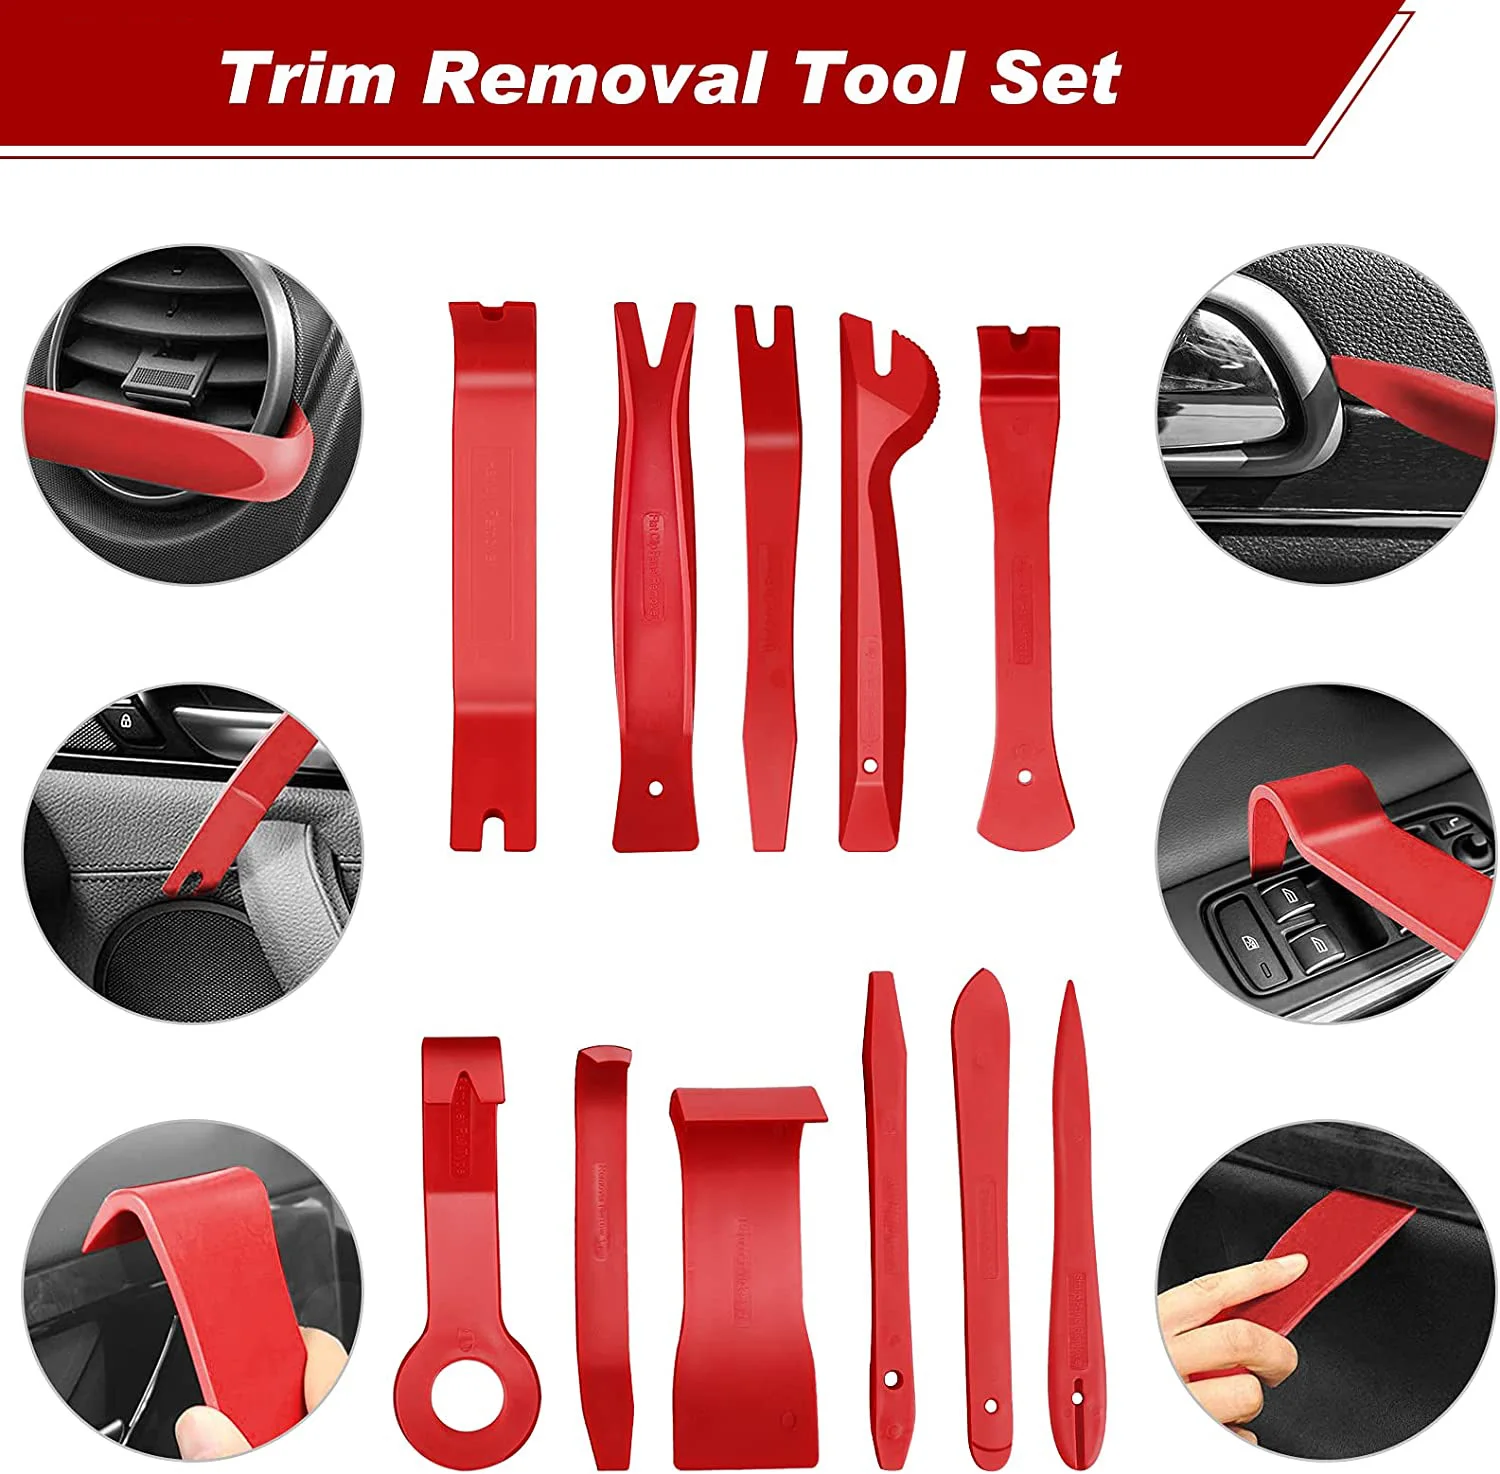 Auto Interior Disassembly Kit Car Plastic Trim Removal Tool Car Clips Puller Diy Panel Tools For Auto Trim Puller Set